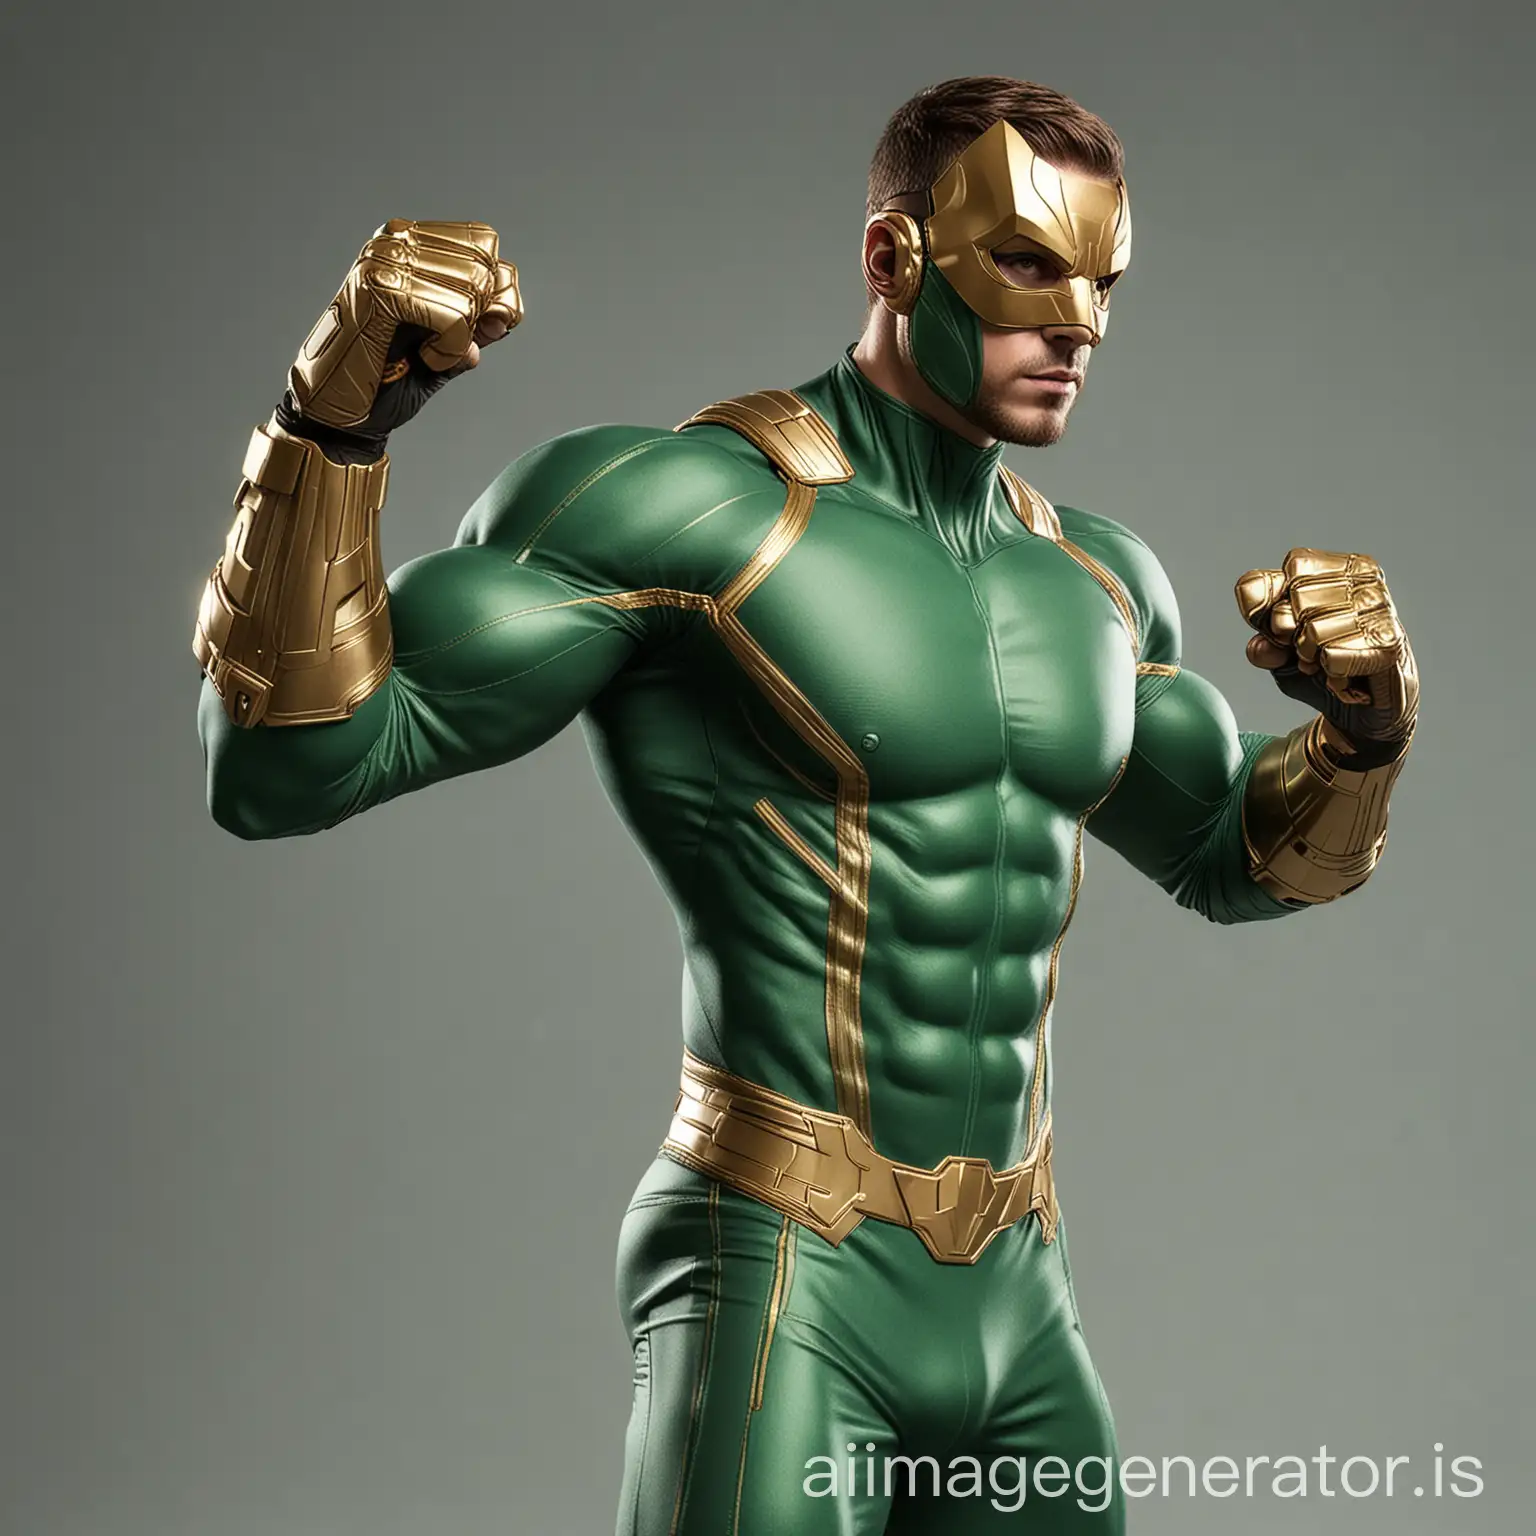 MUSCULAR_THIN MALE _SUPERHERO_WITH_HEAD MASK OPEN  BROWN HAIR VIEW FACEMASK GREEN, HARNESS_AND_BRACELETT GOLD FOREARM GREEN SUIT _HI_TECH_SUIT_WITH_ARMS_OUT_CAMELEON COLOR__3___1 POSE IN ACTION